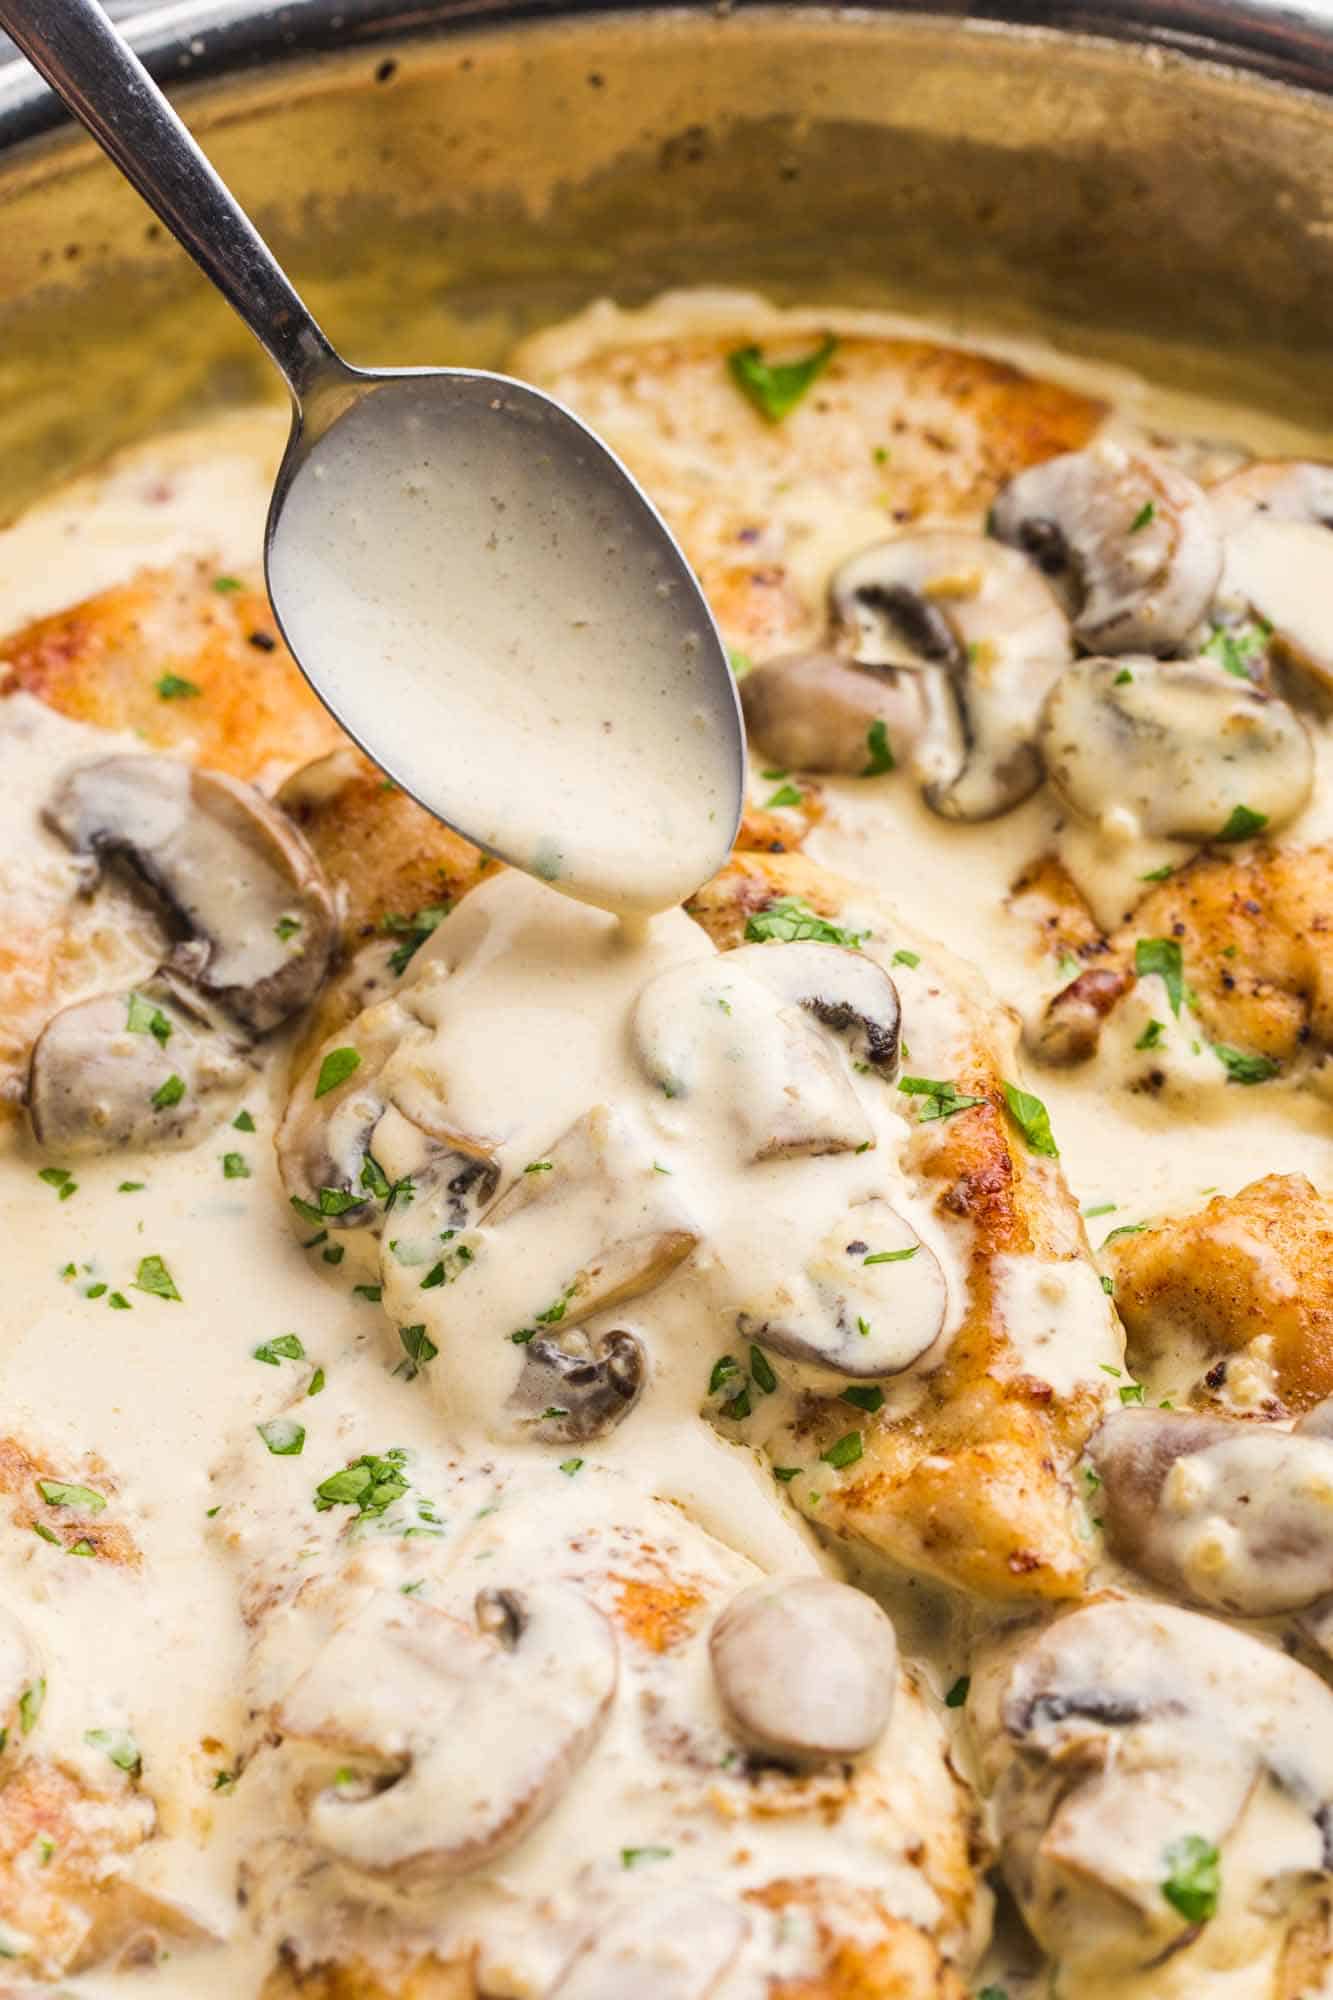 Drizzling mushroom cream sauce over the chicken with a spoon